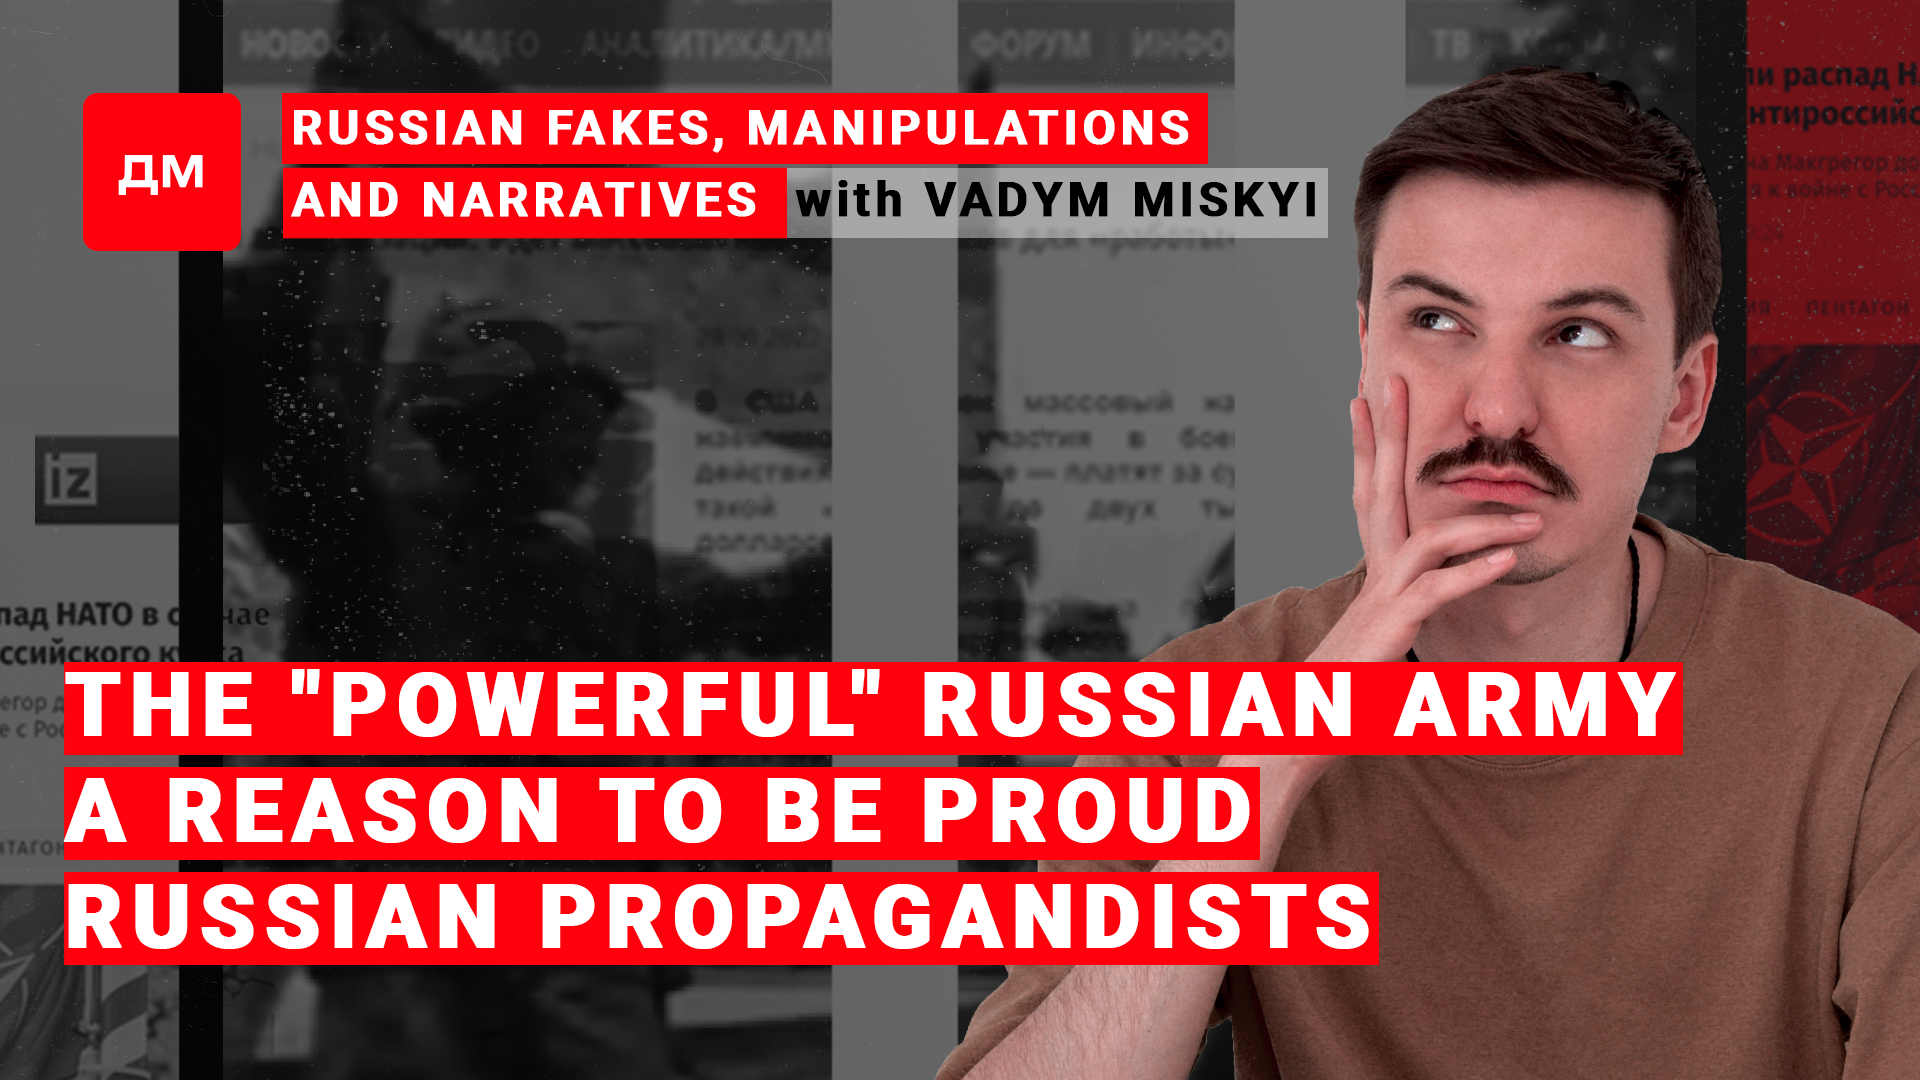 Image: Russian fakes, manipulations and narratives / Briefing by Vadym Miskyi #11/Season II